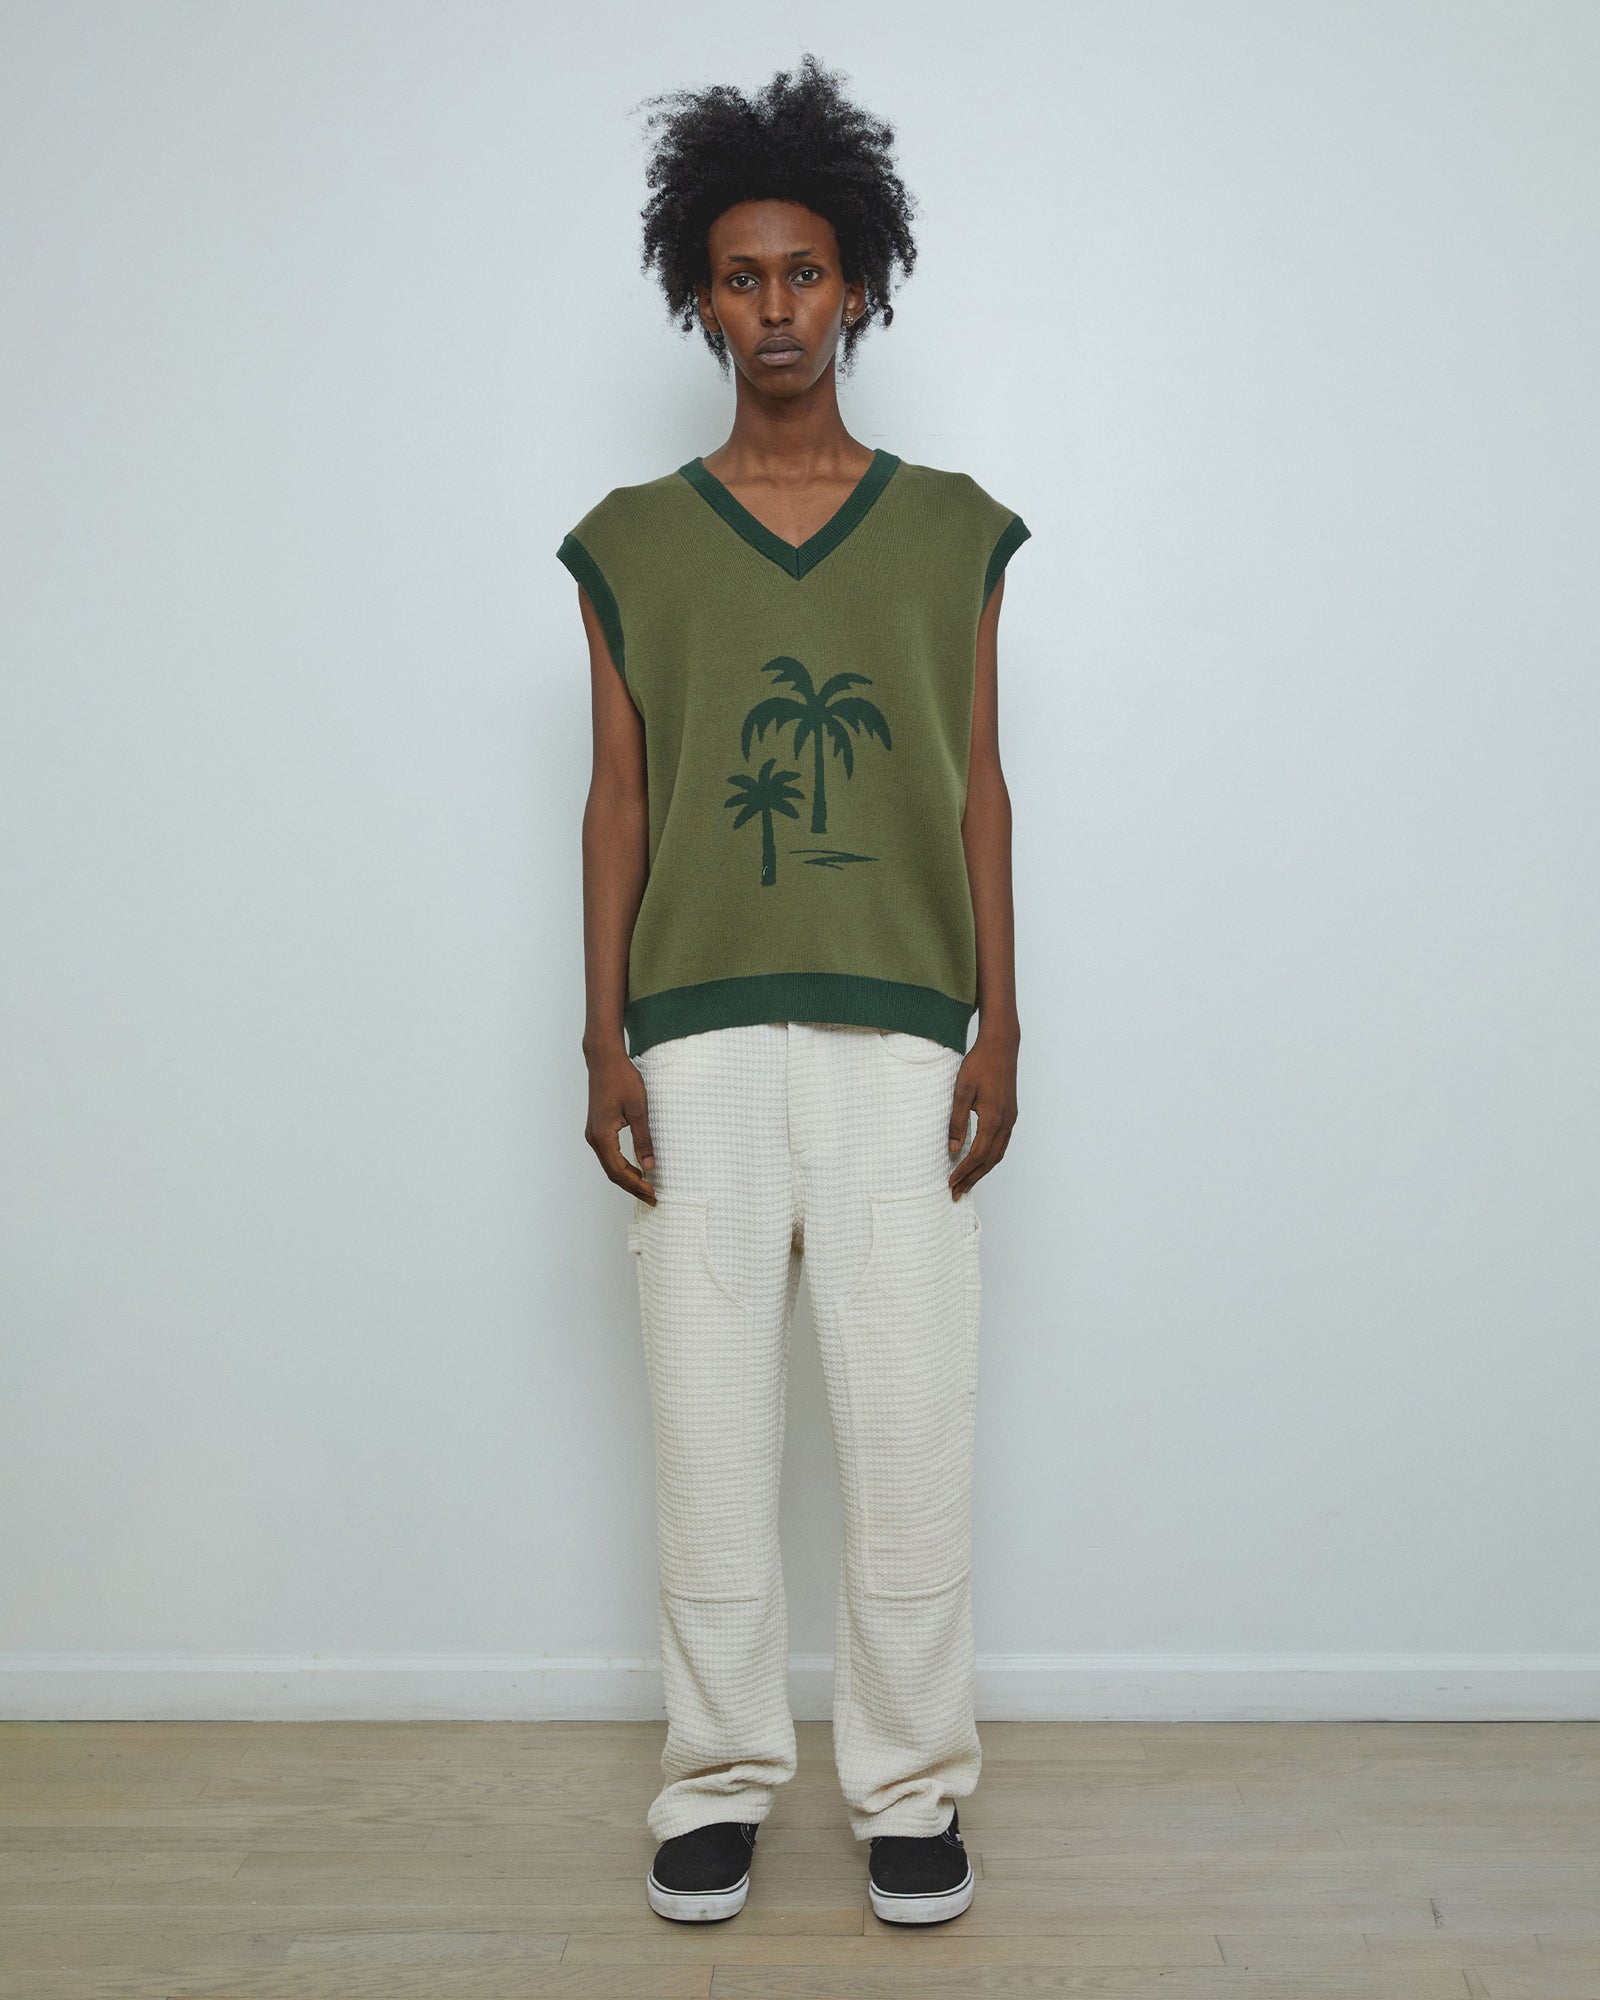 Palm Tree Olive Green Sweater Vest - mens designer fashion sweaters by Krost